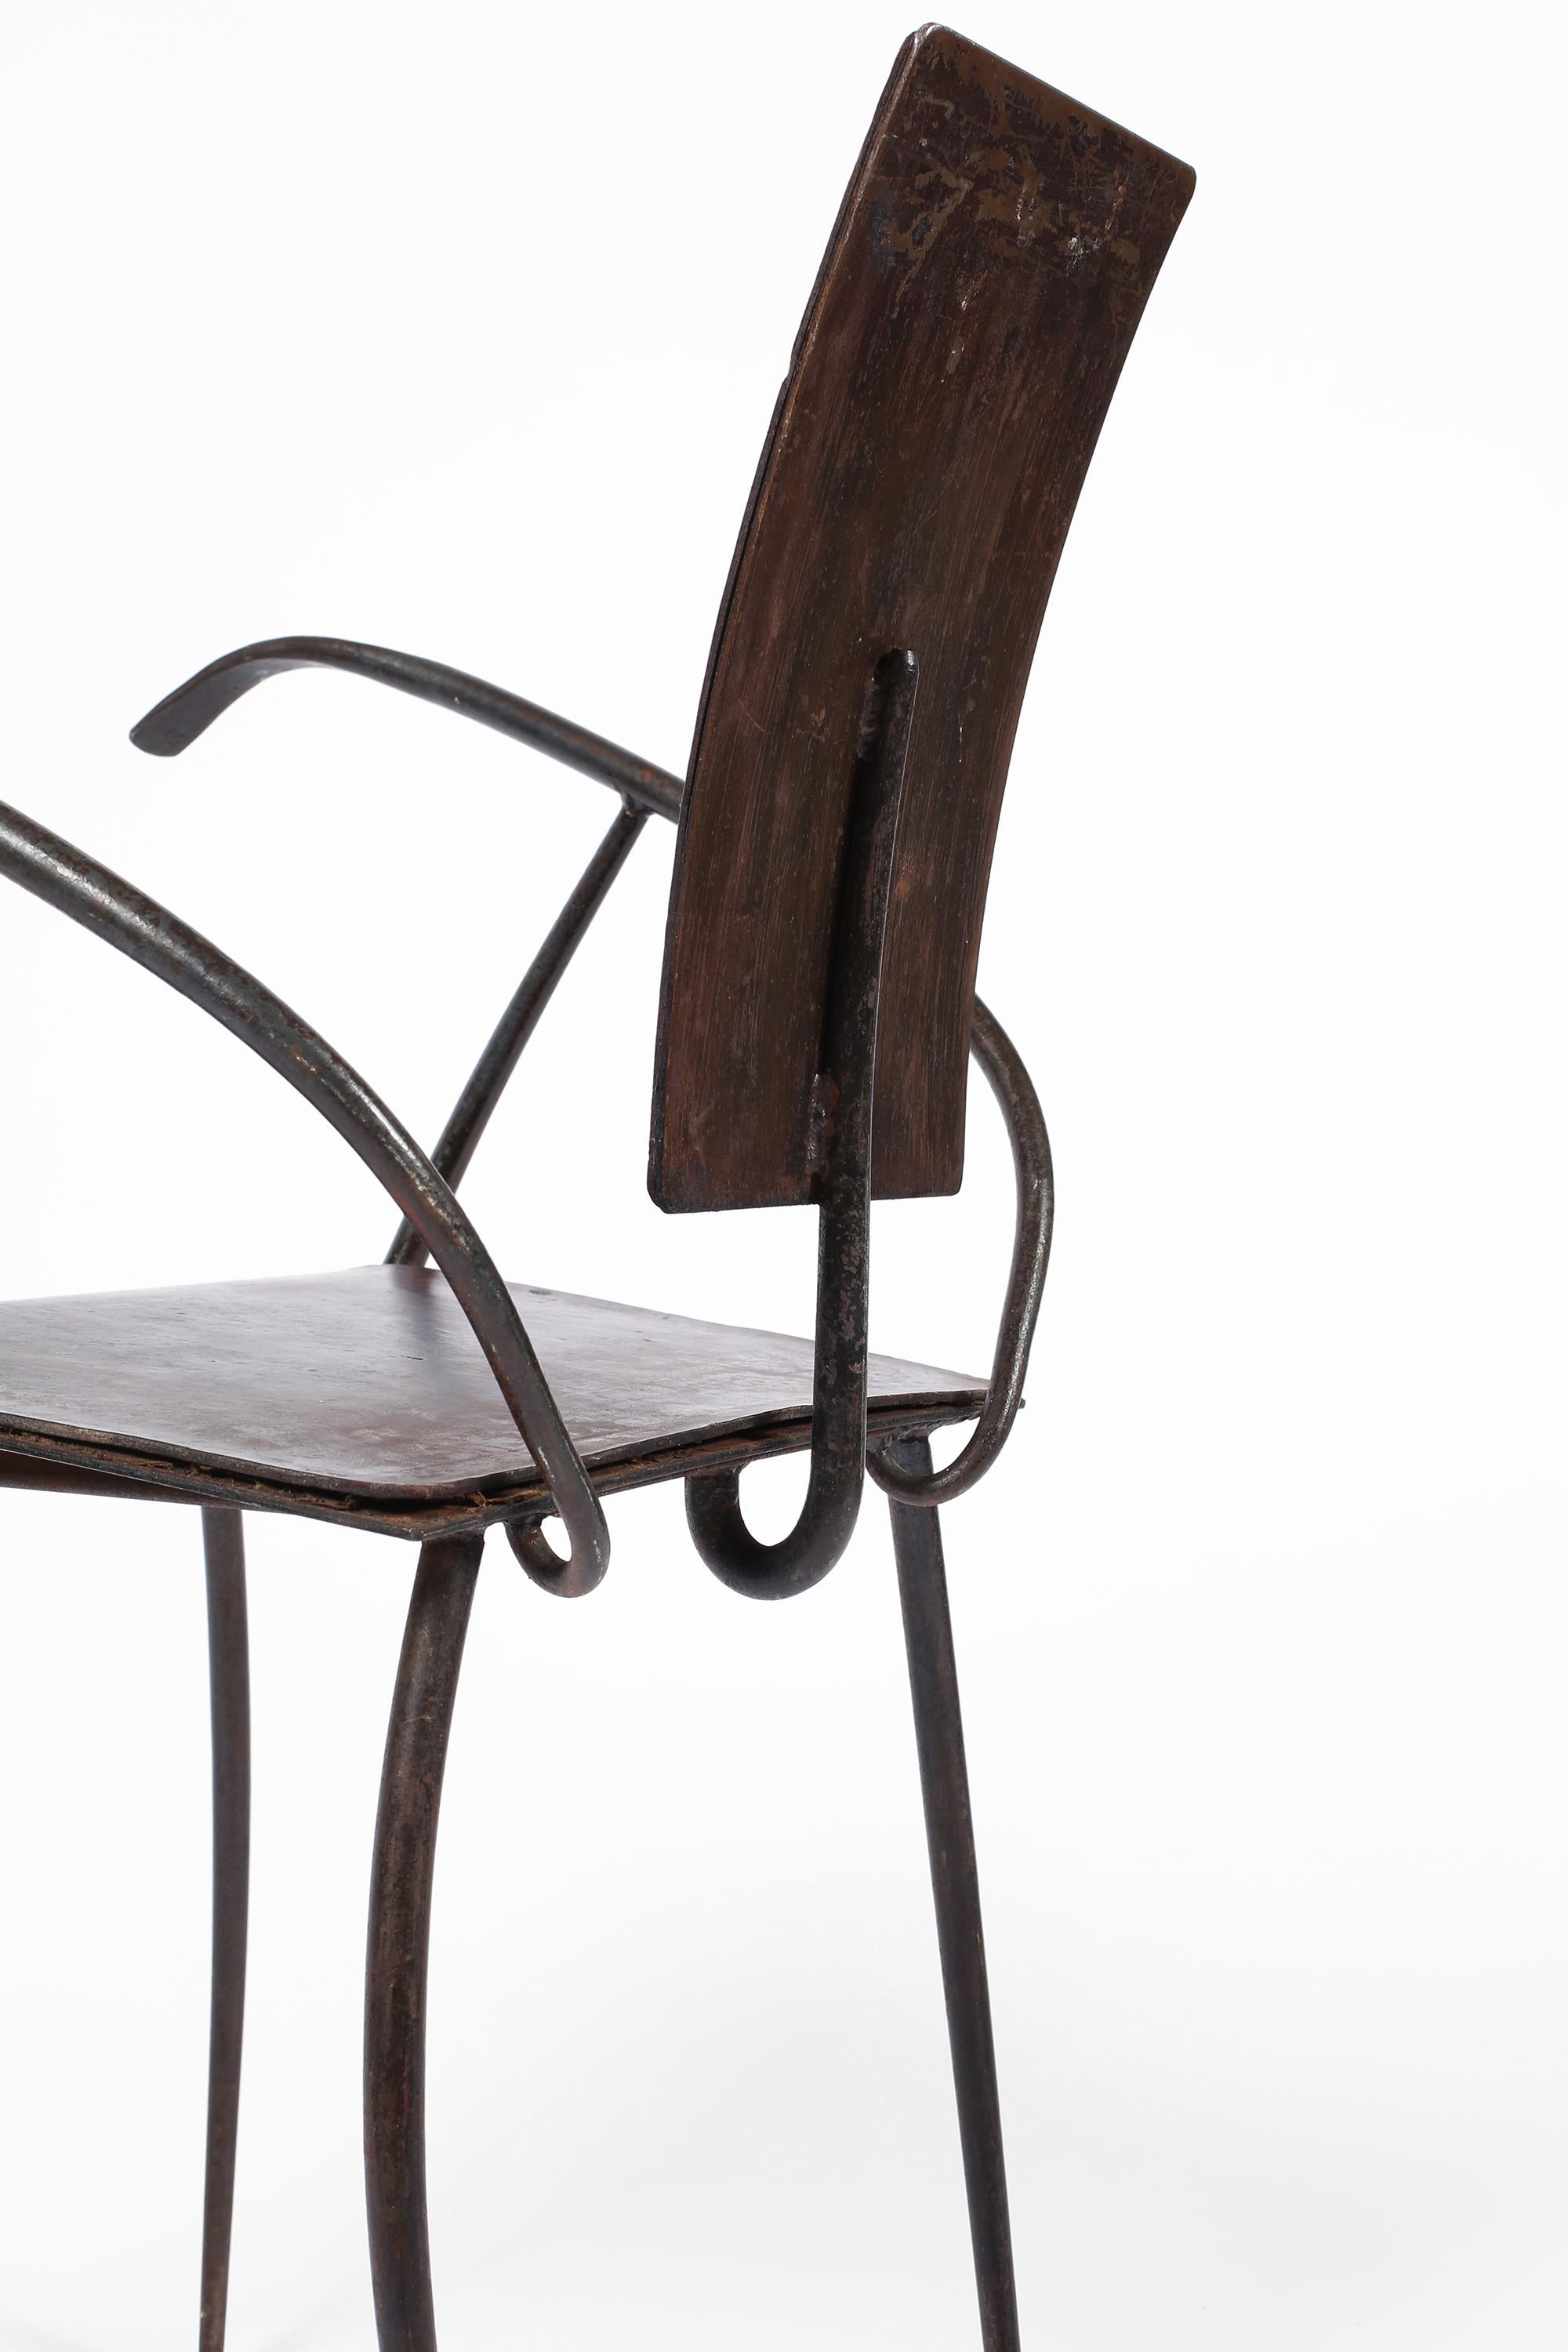 20th Century Artisanal French Modernist Iron and Leather Chair Midcentury Modern For Sale